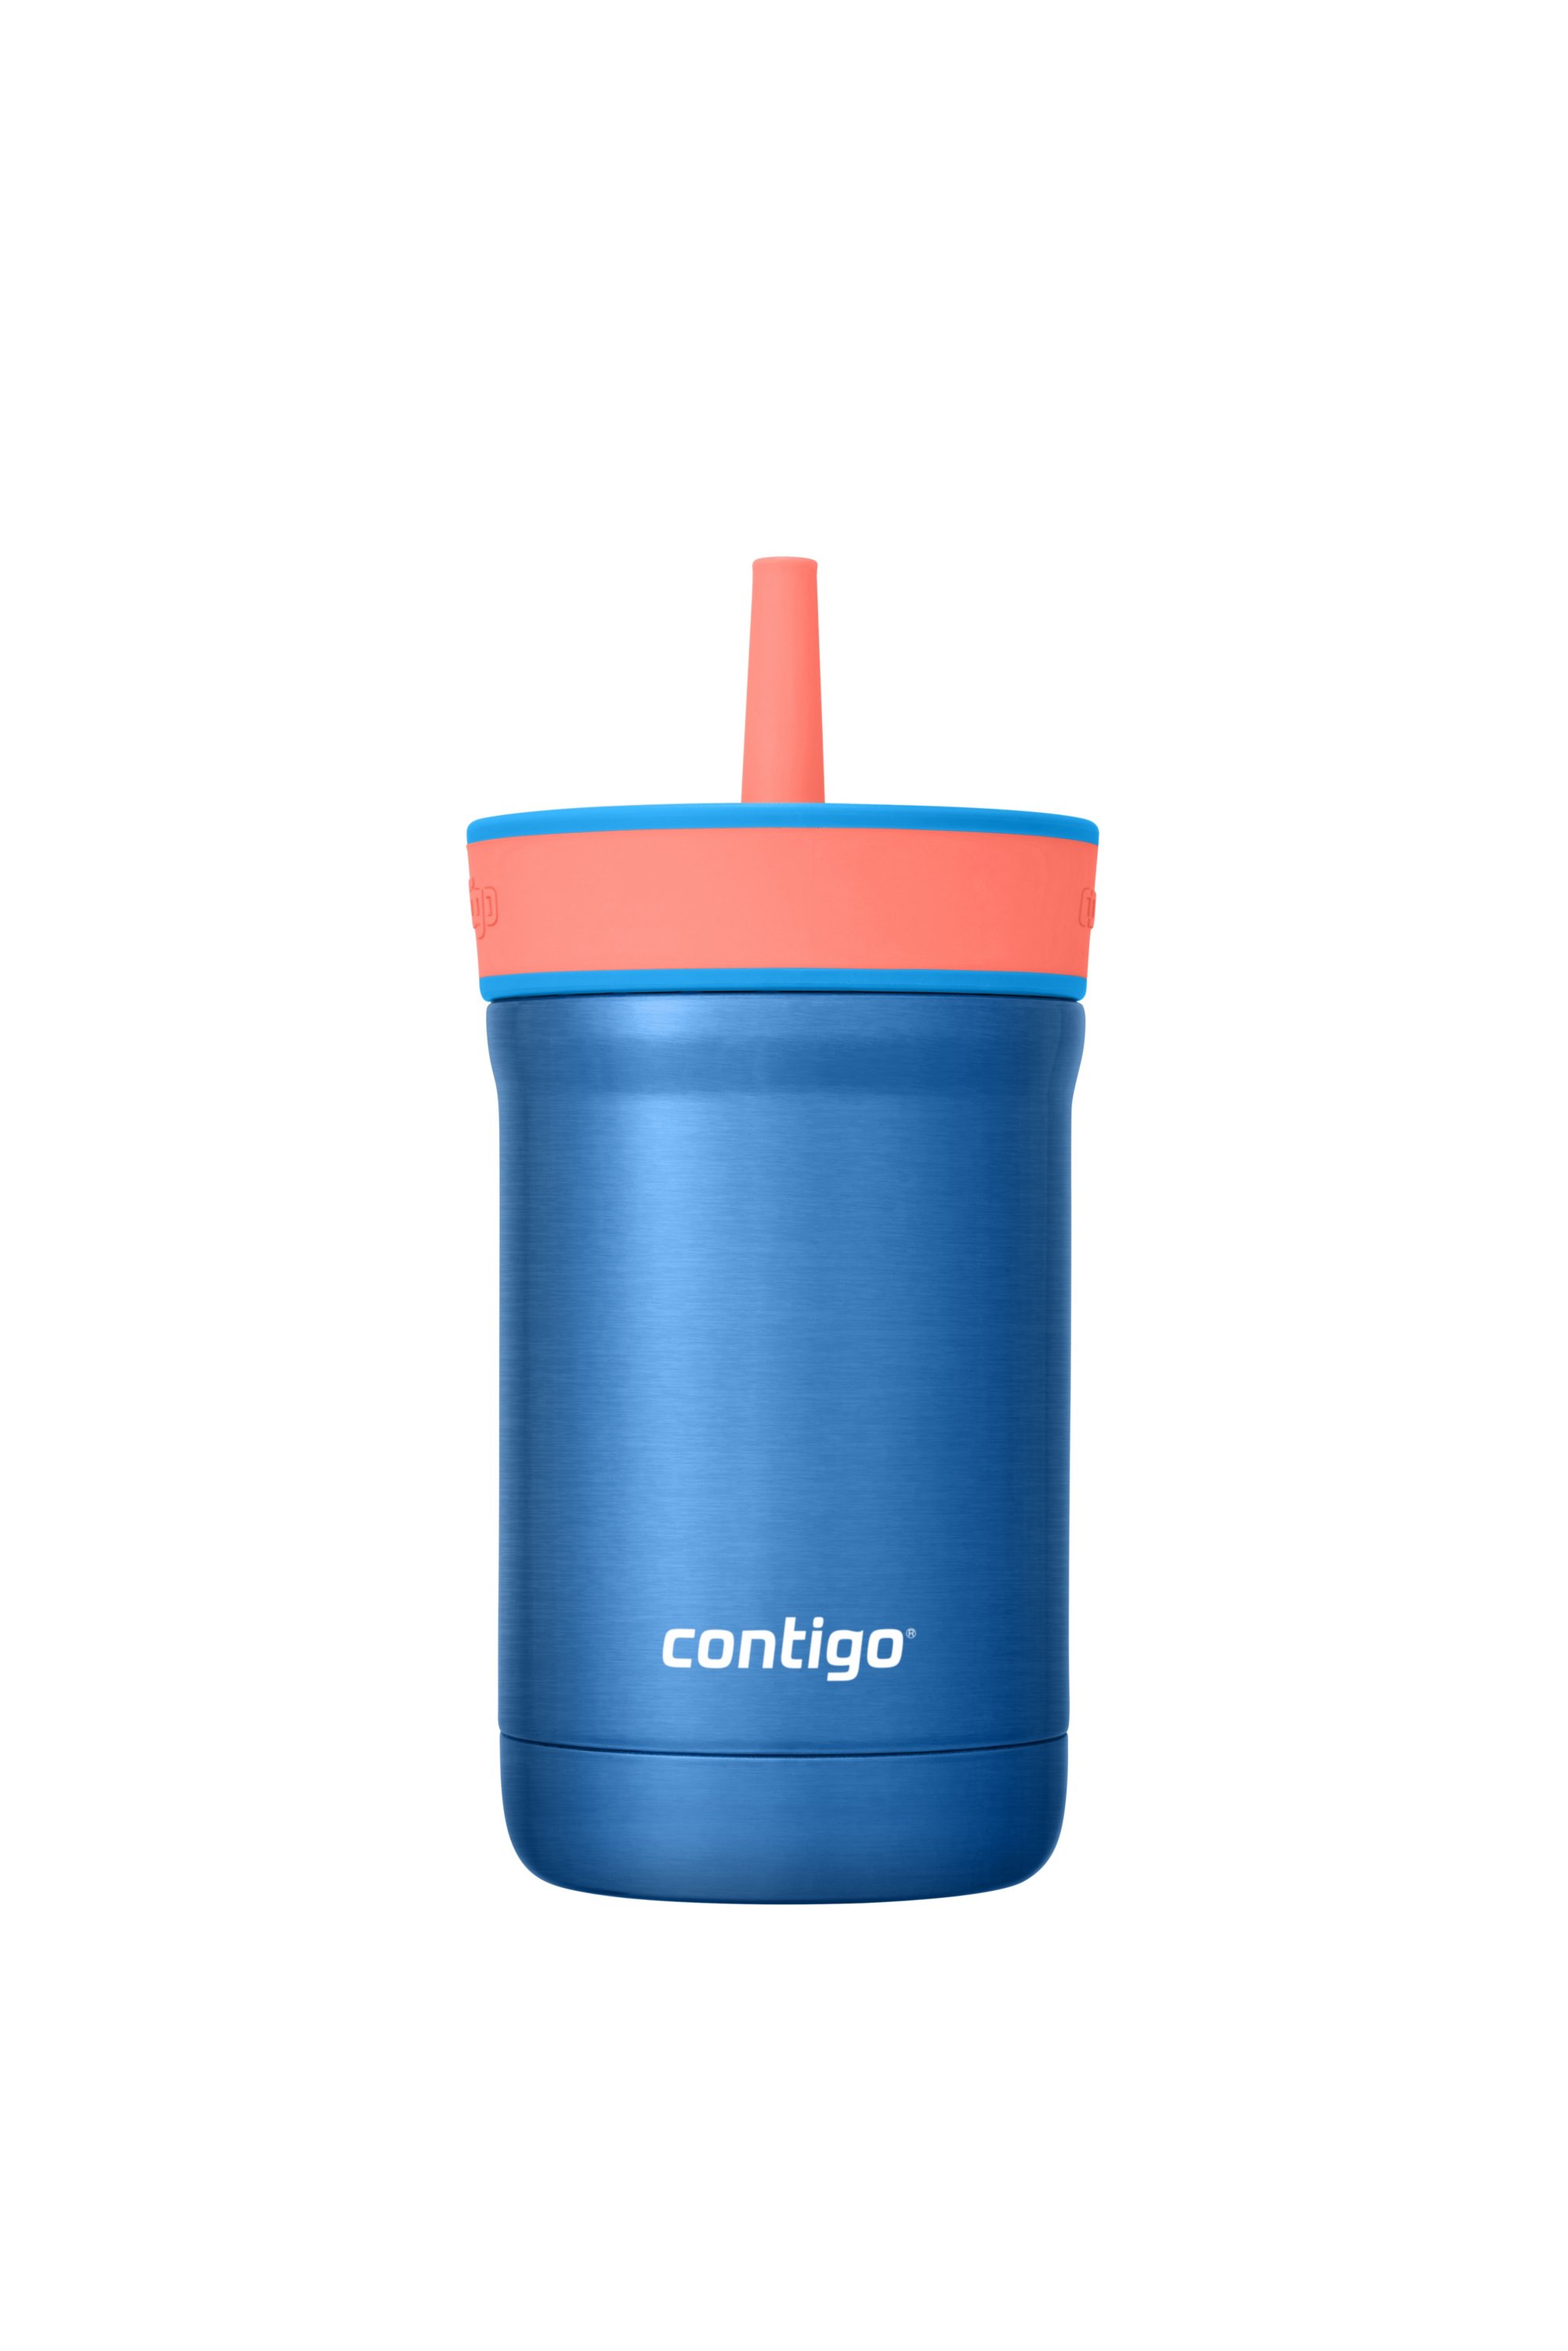 Contigo Kids Spill-Proof Stainless Steel Tumbler with Straw and